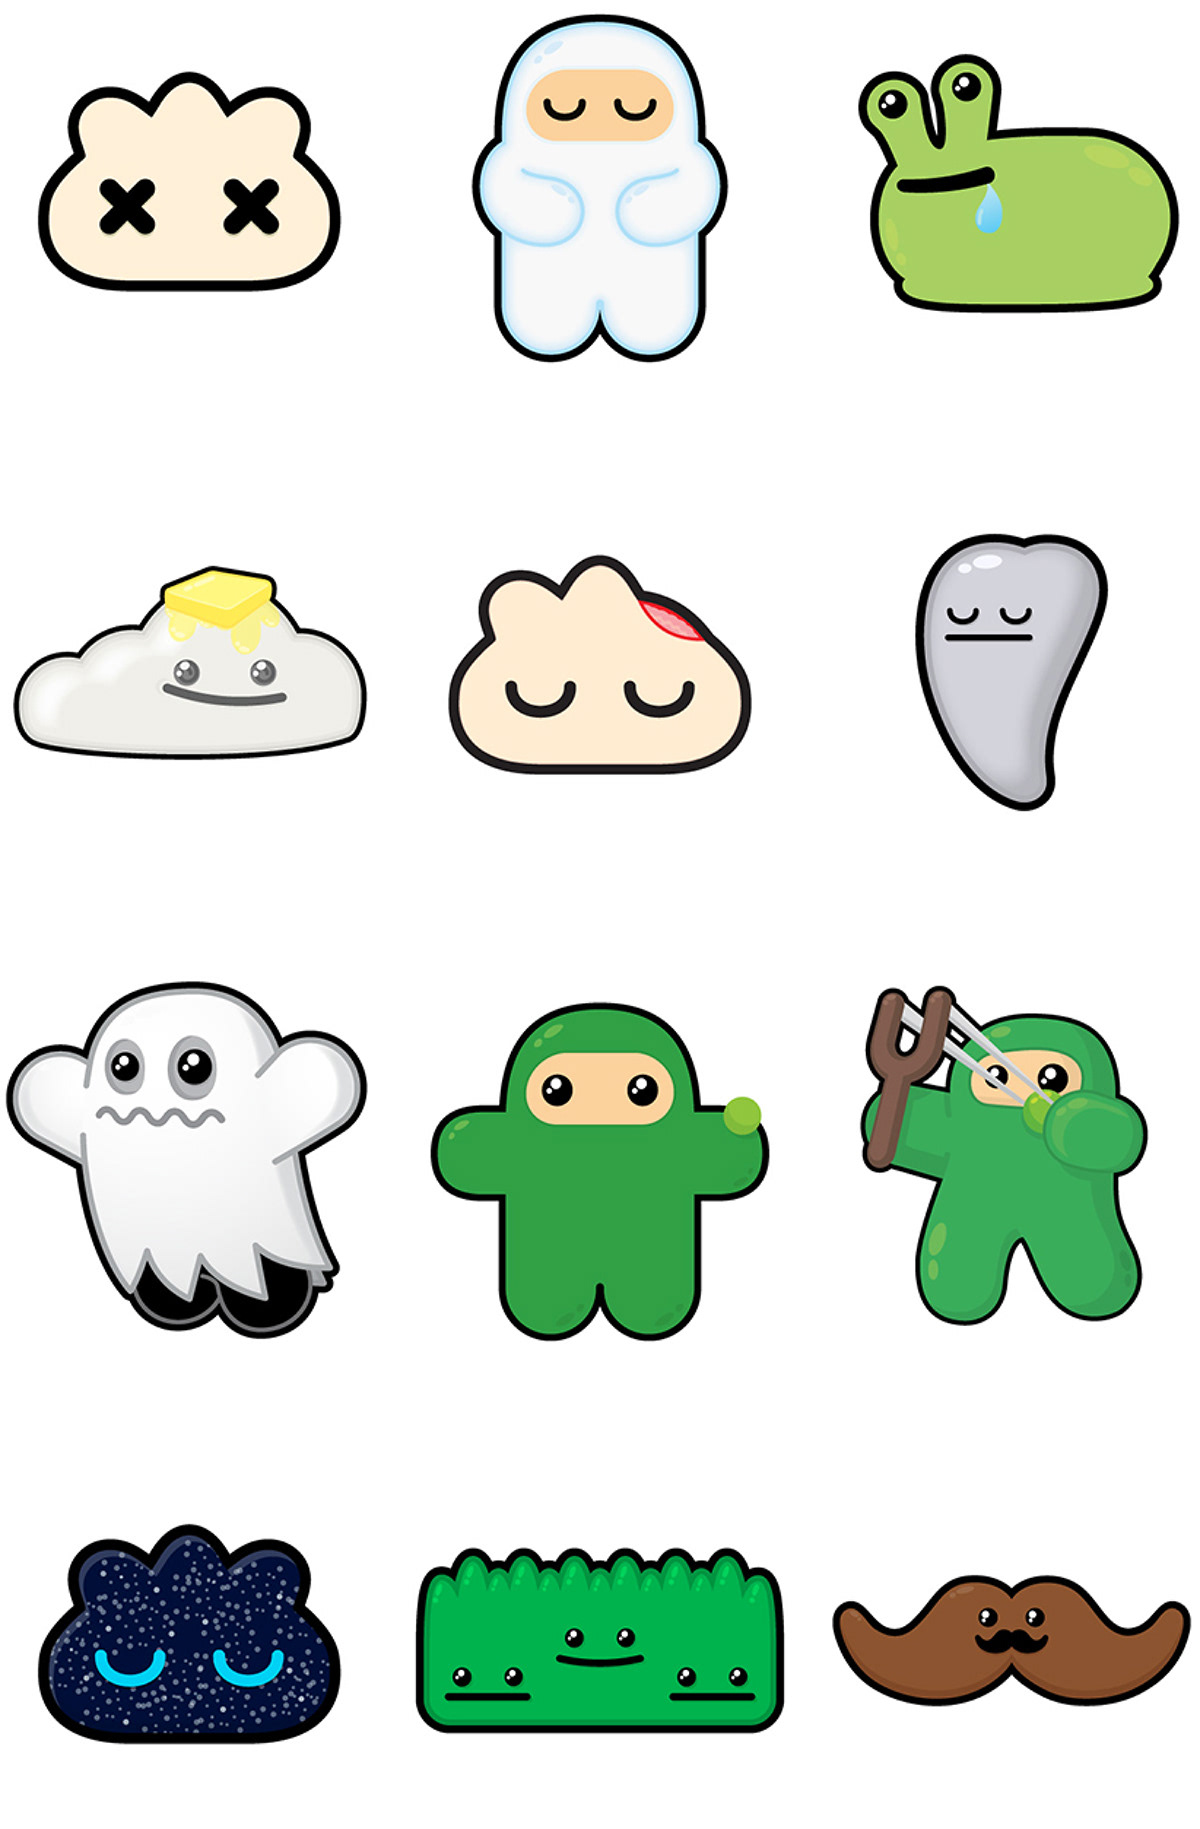 Ninjatown shawnimals vector iconic characters cute moustachio cute characters mustache monsters